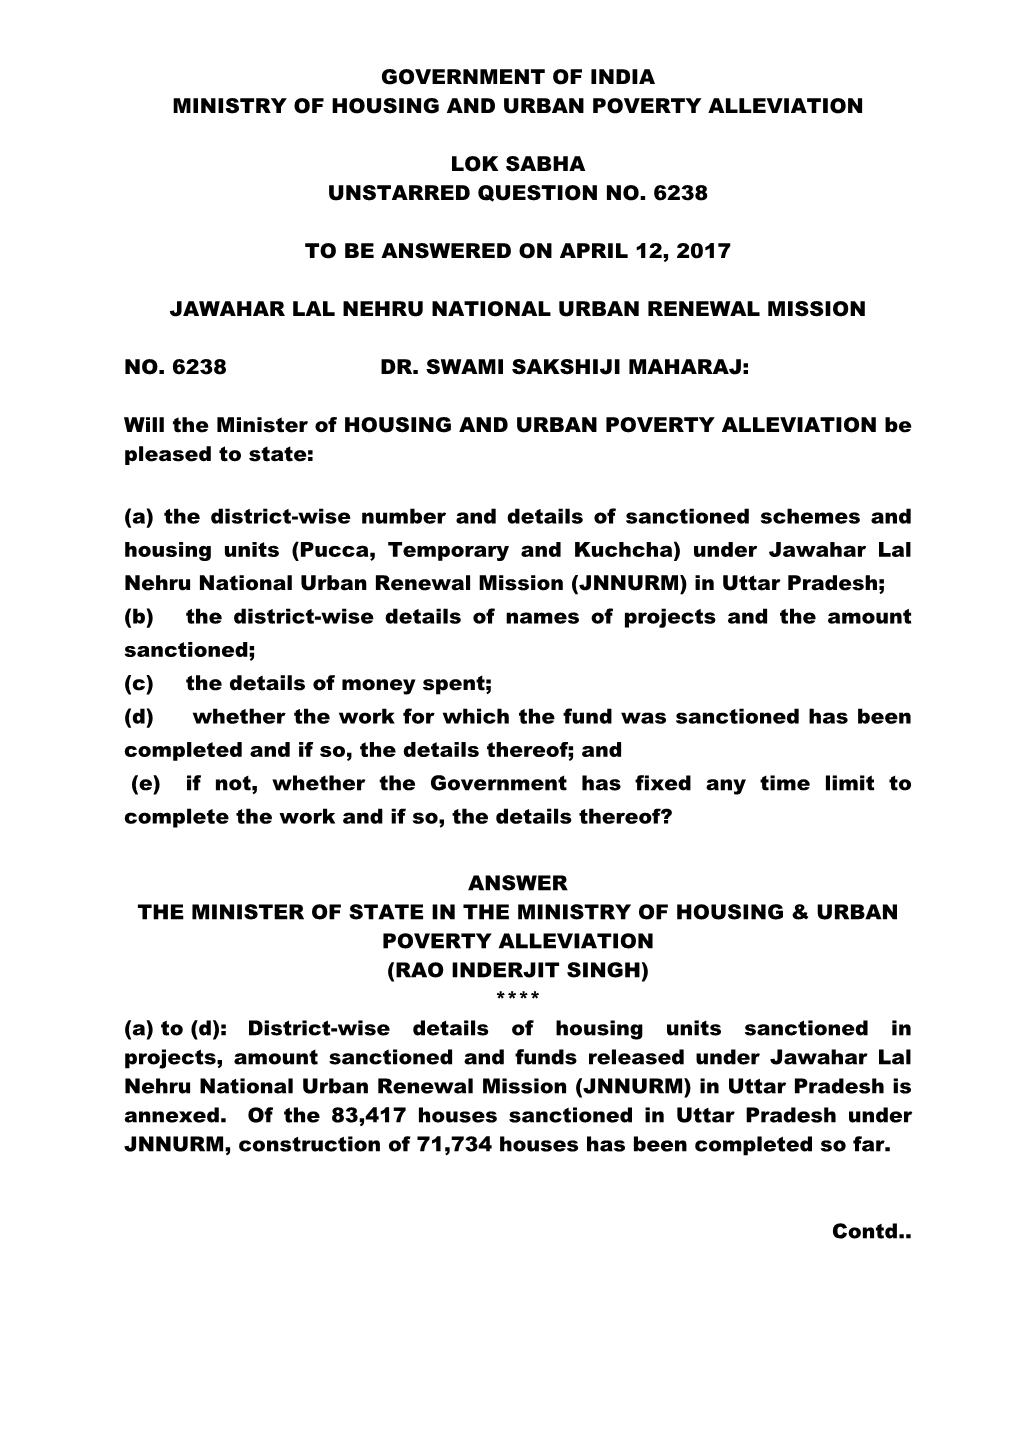 Government of India Ministry of Housing and Urban Poverty Alleviation